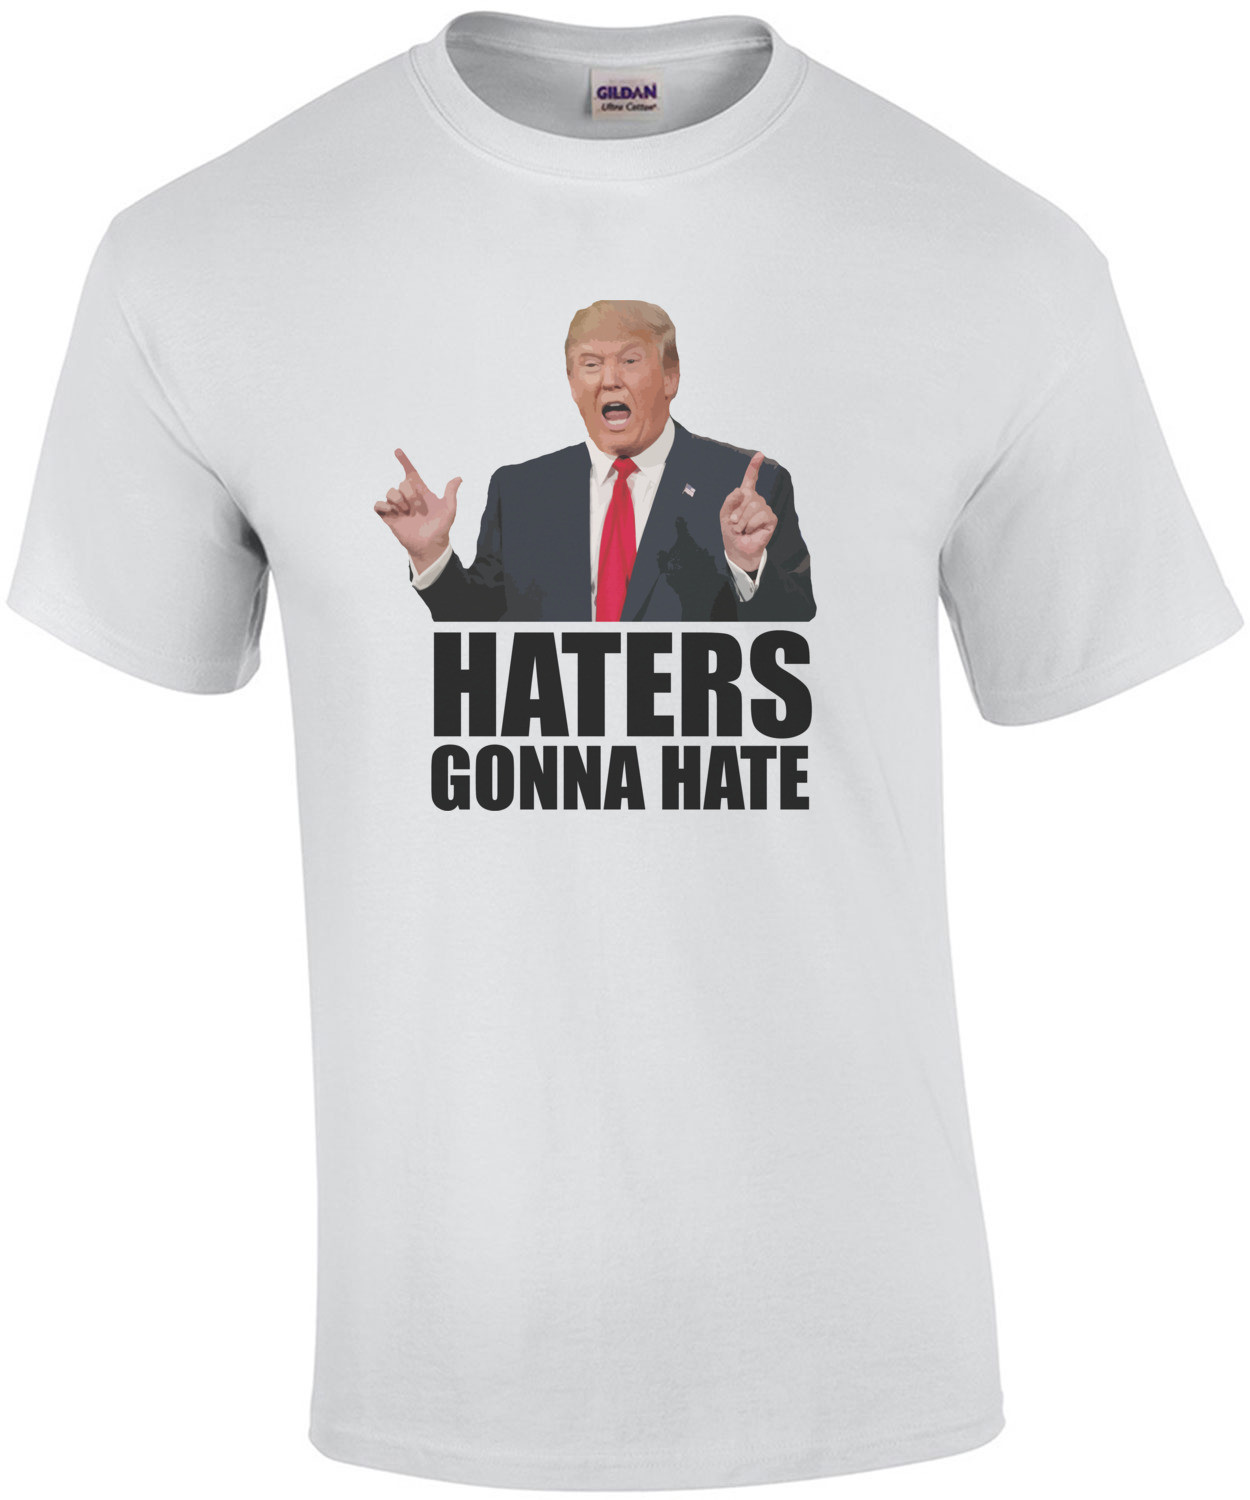 Haters gonna hate - Donald Trump Green T-Shirt